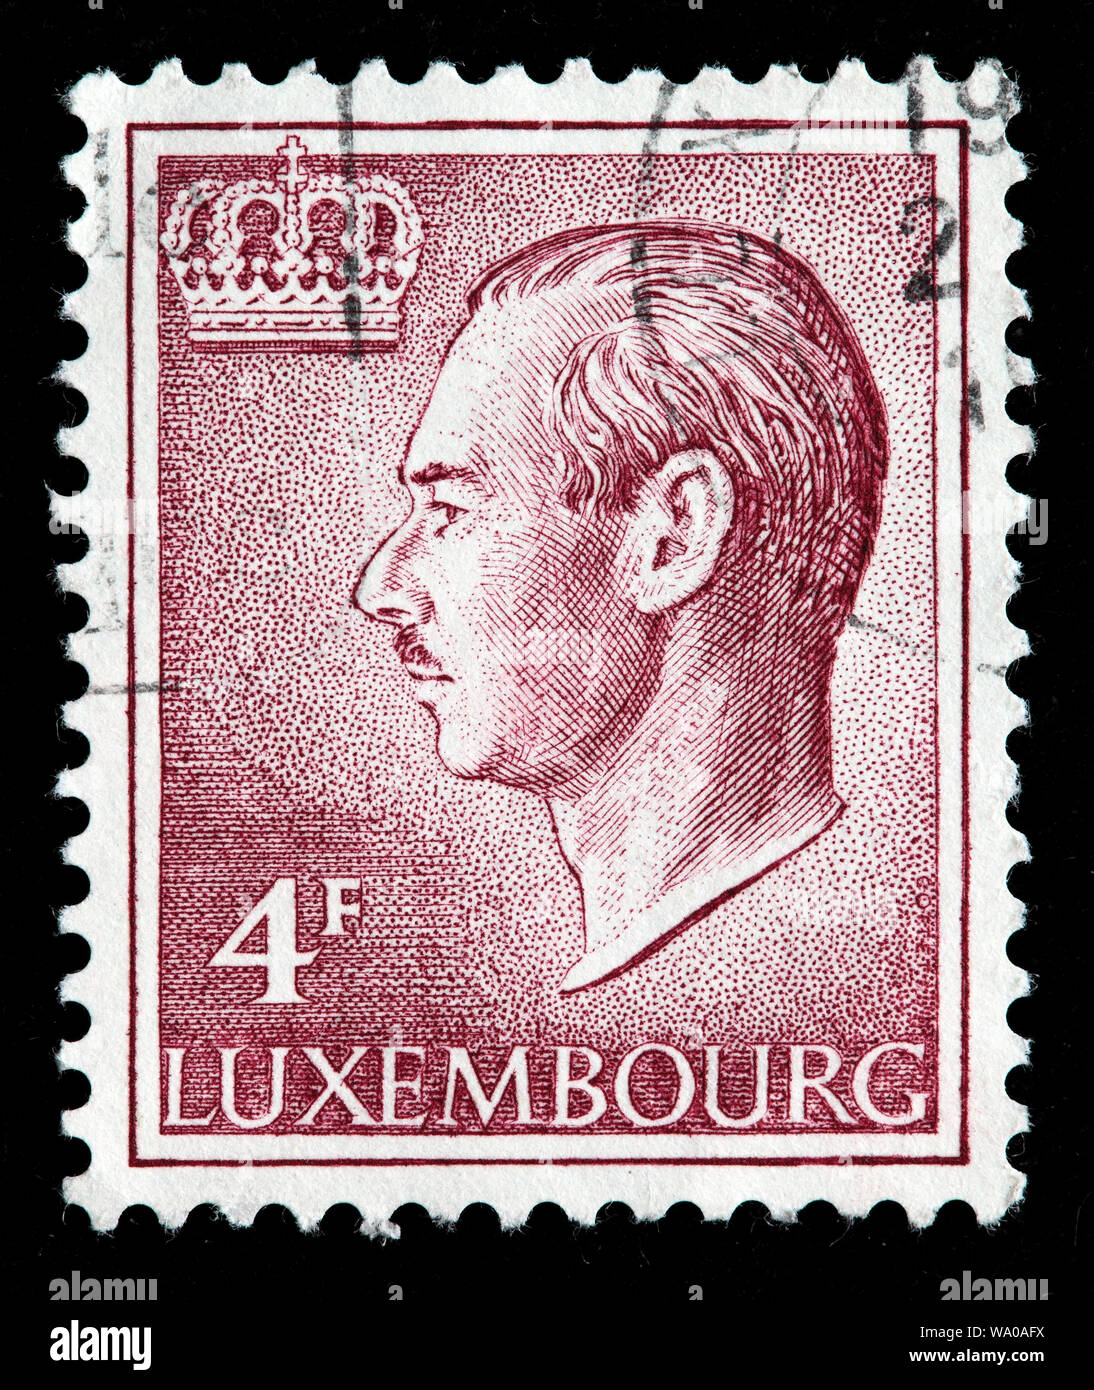 Jean, Grand Duke of Luxembourg (1964-2000), postage stamp, Luxembourg, 1964  Stock Photo - Alamy